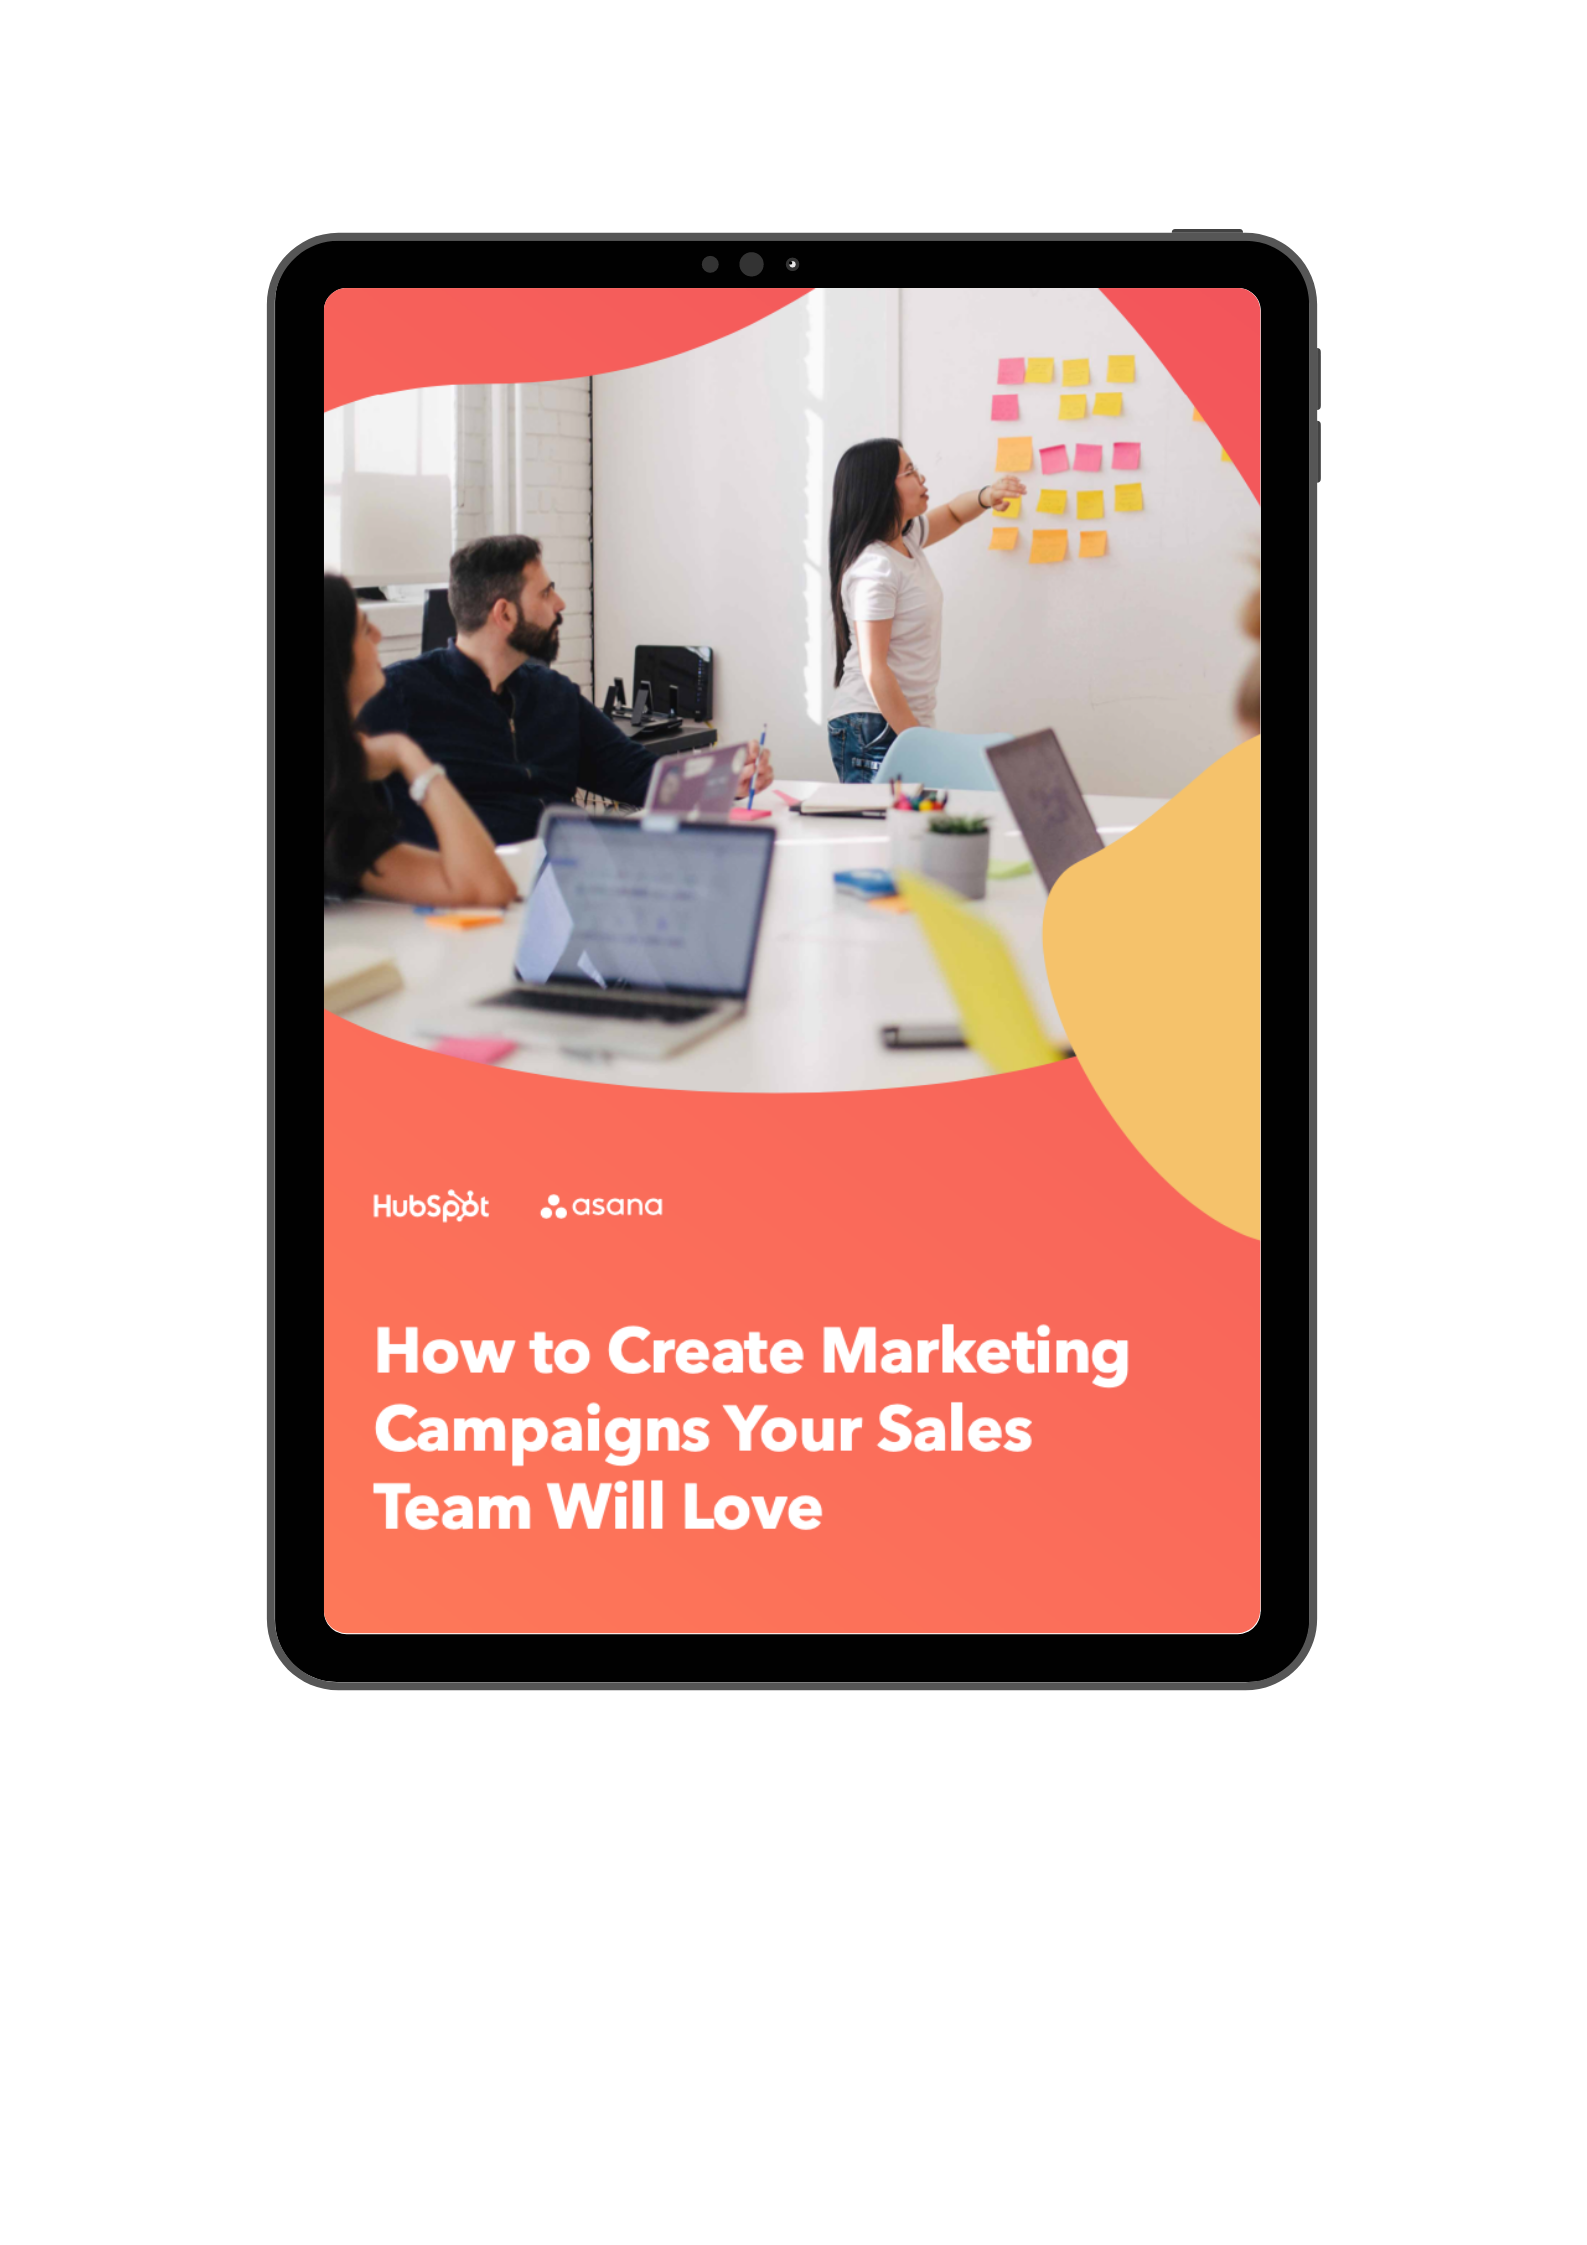 How to Create Marketing Campaigns Your Sales Team Will Love (1)